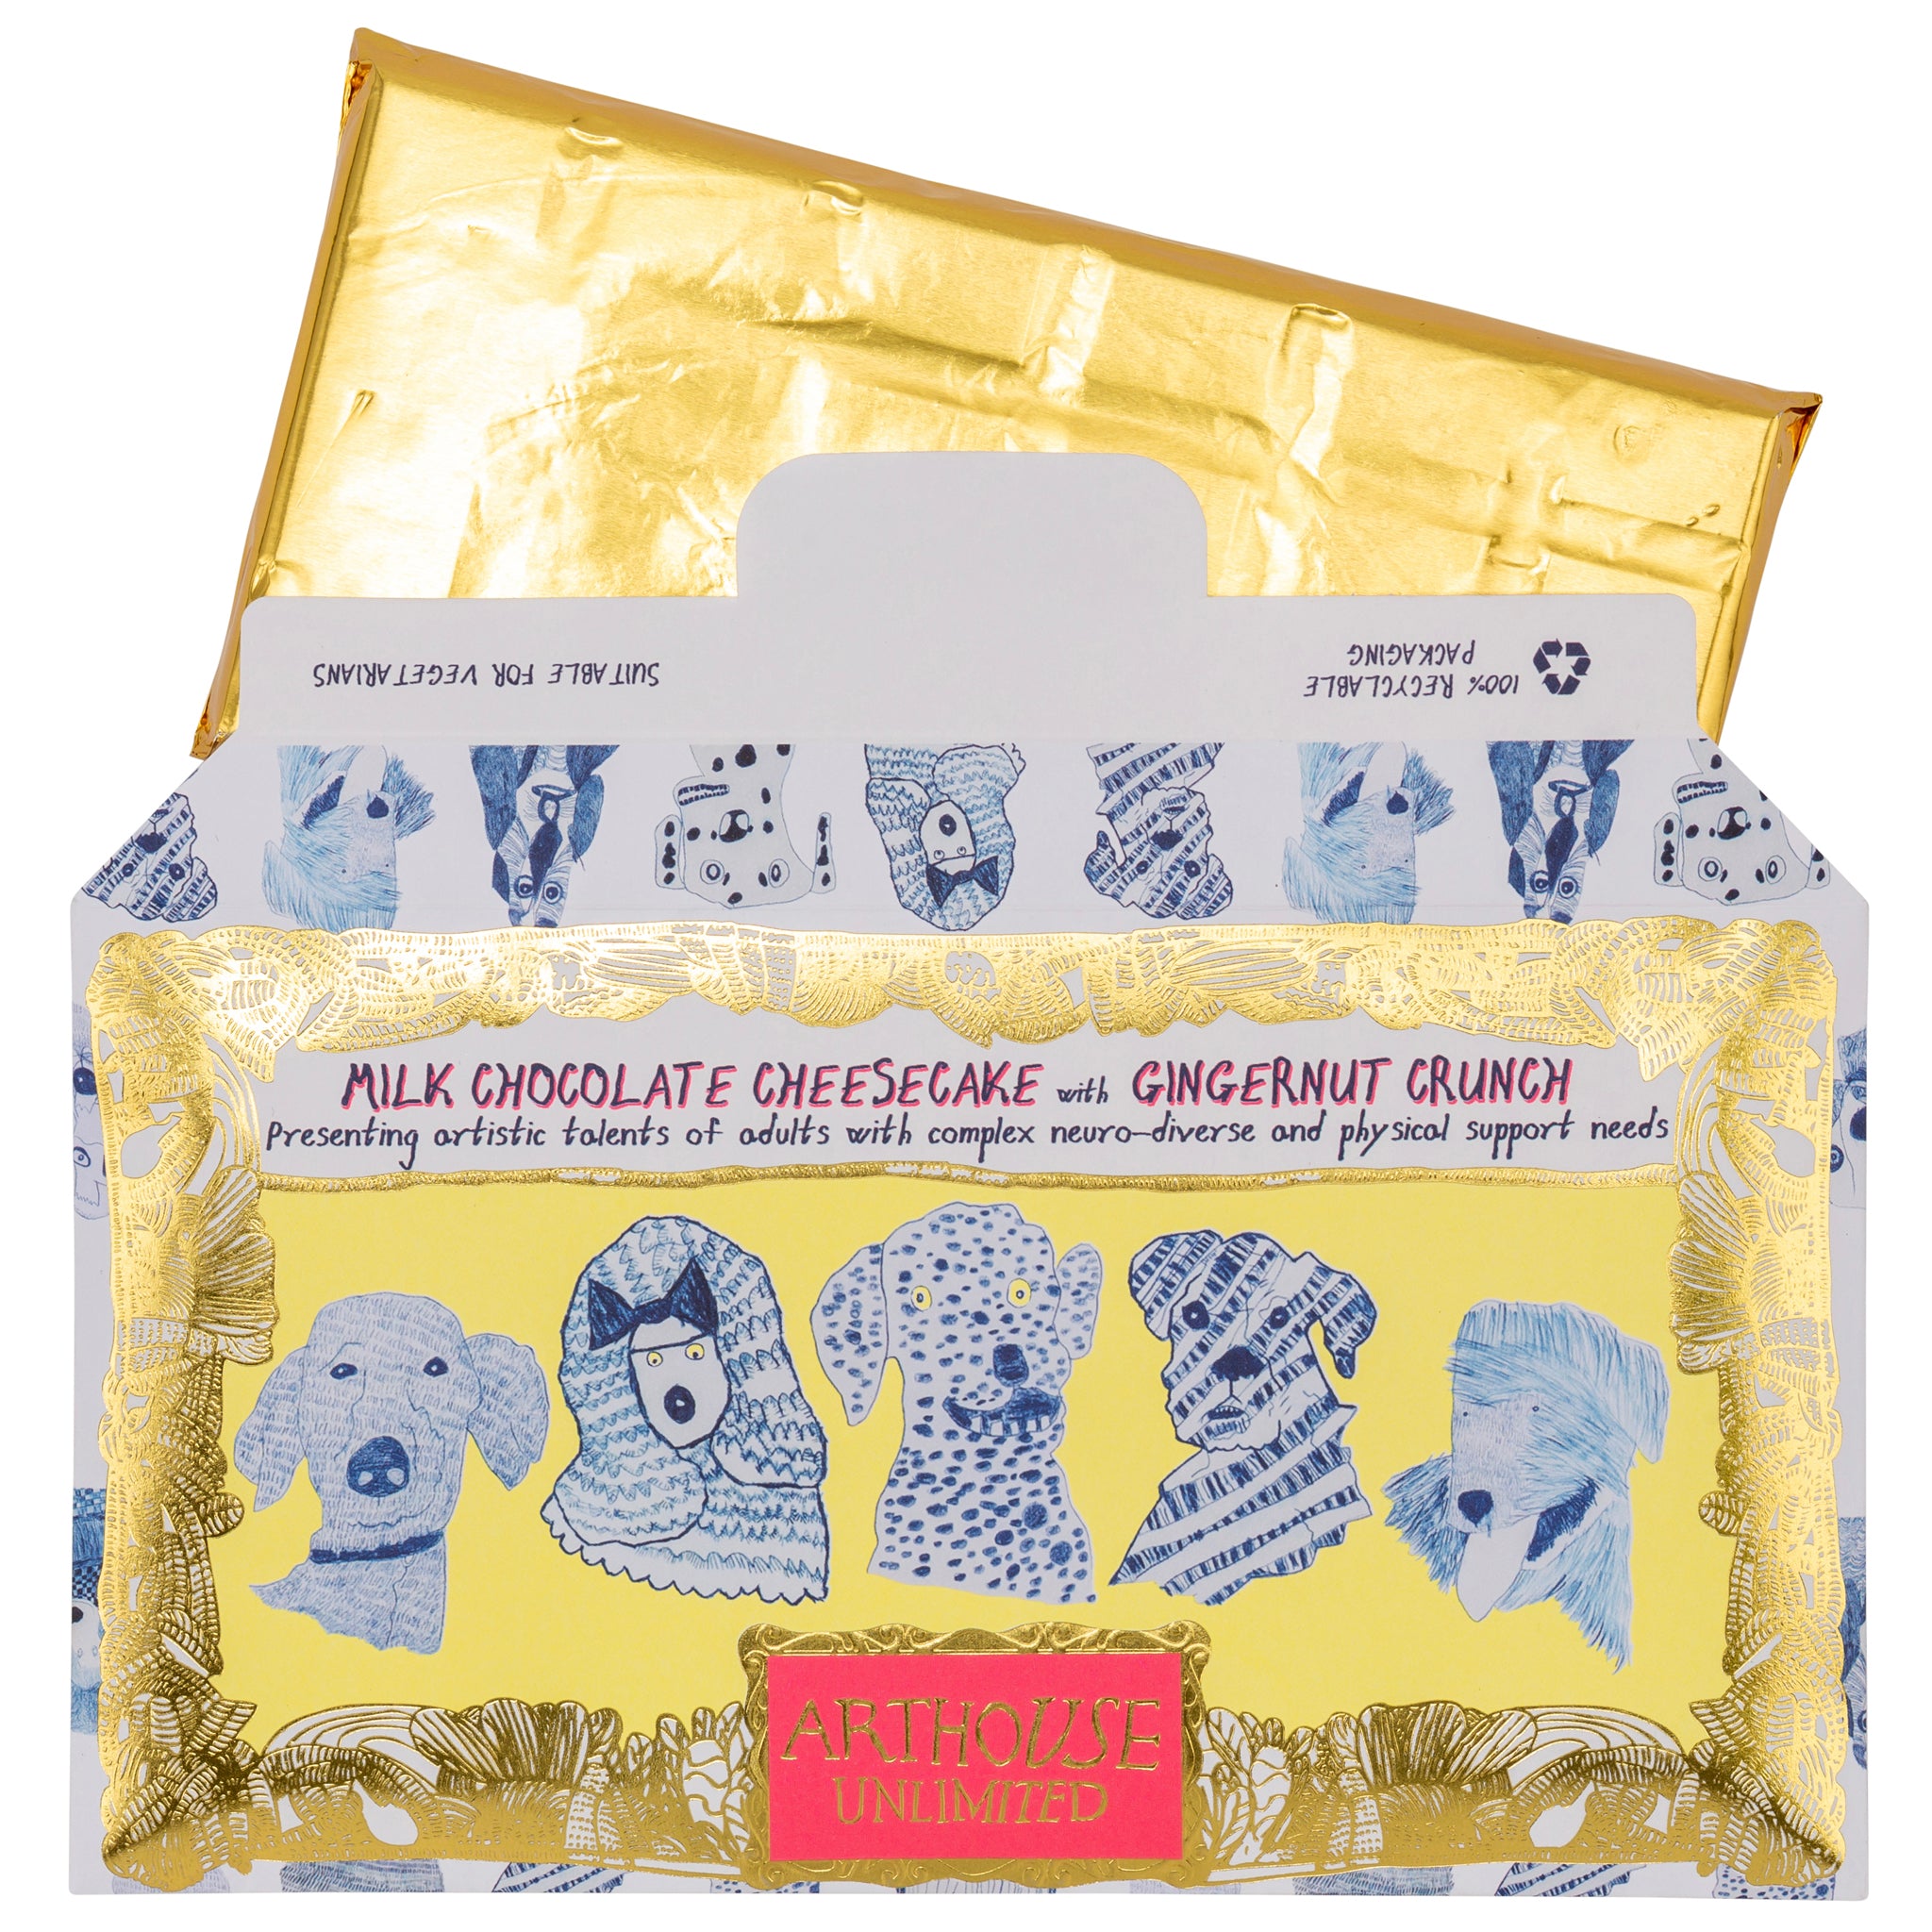 open packet of Blue Dogs, Milk Chocolate Bar Cheesecake with Gingernut Crunch, blue and yellow packaging